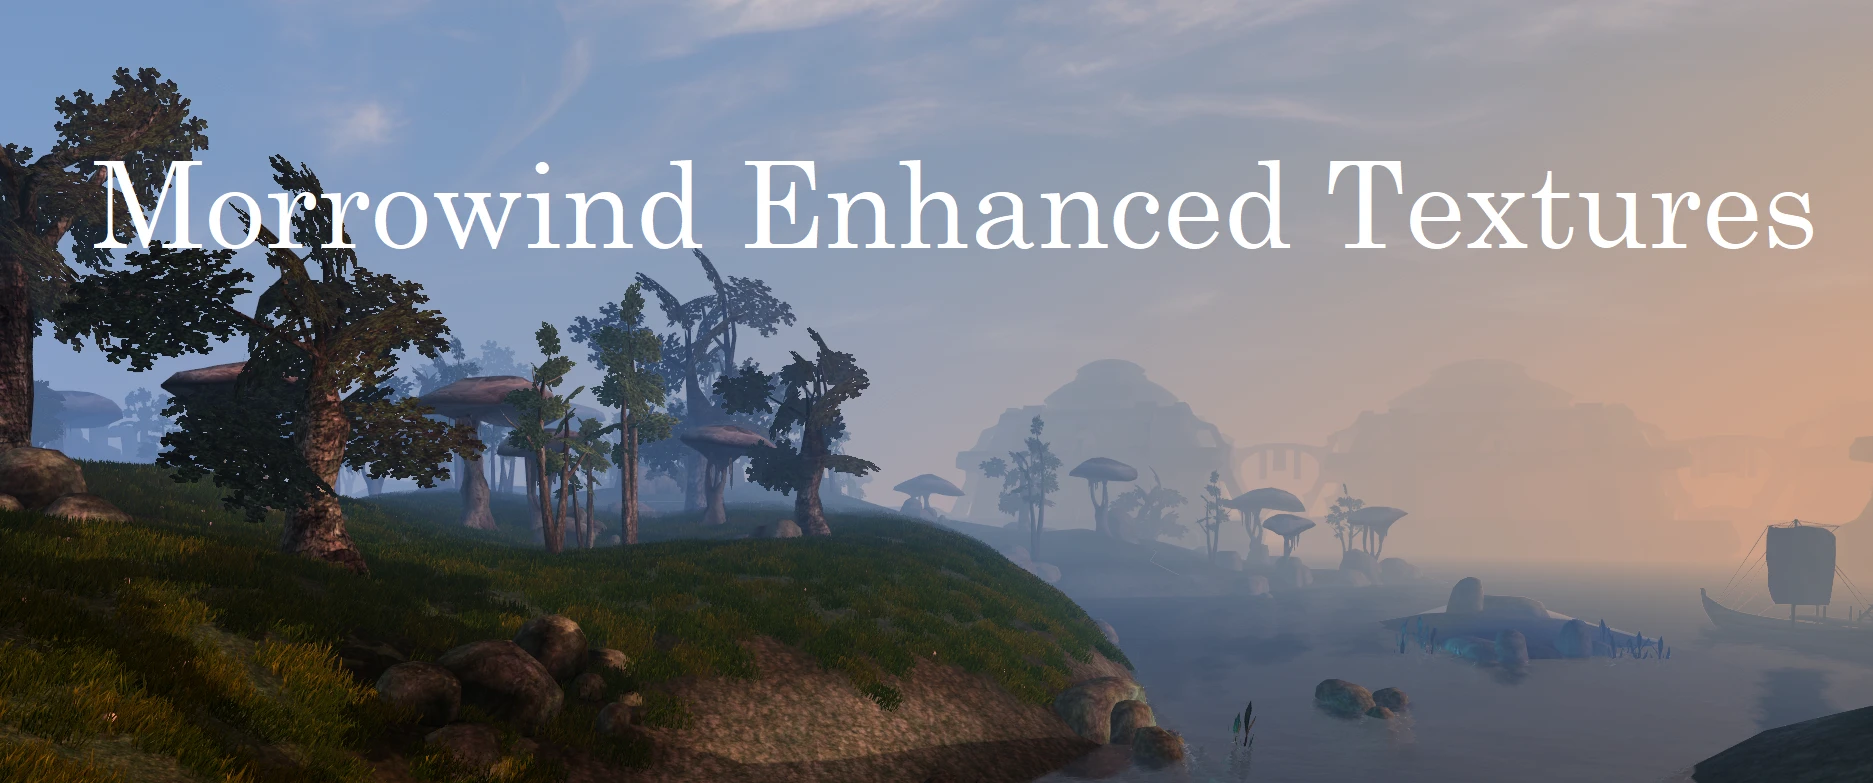 morrowind 3.0 patch download